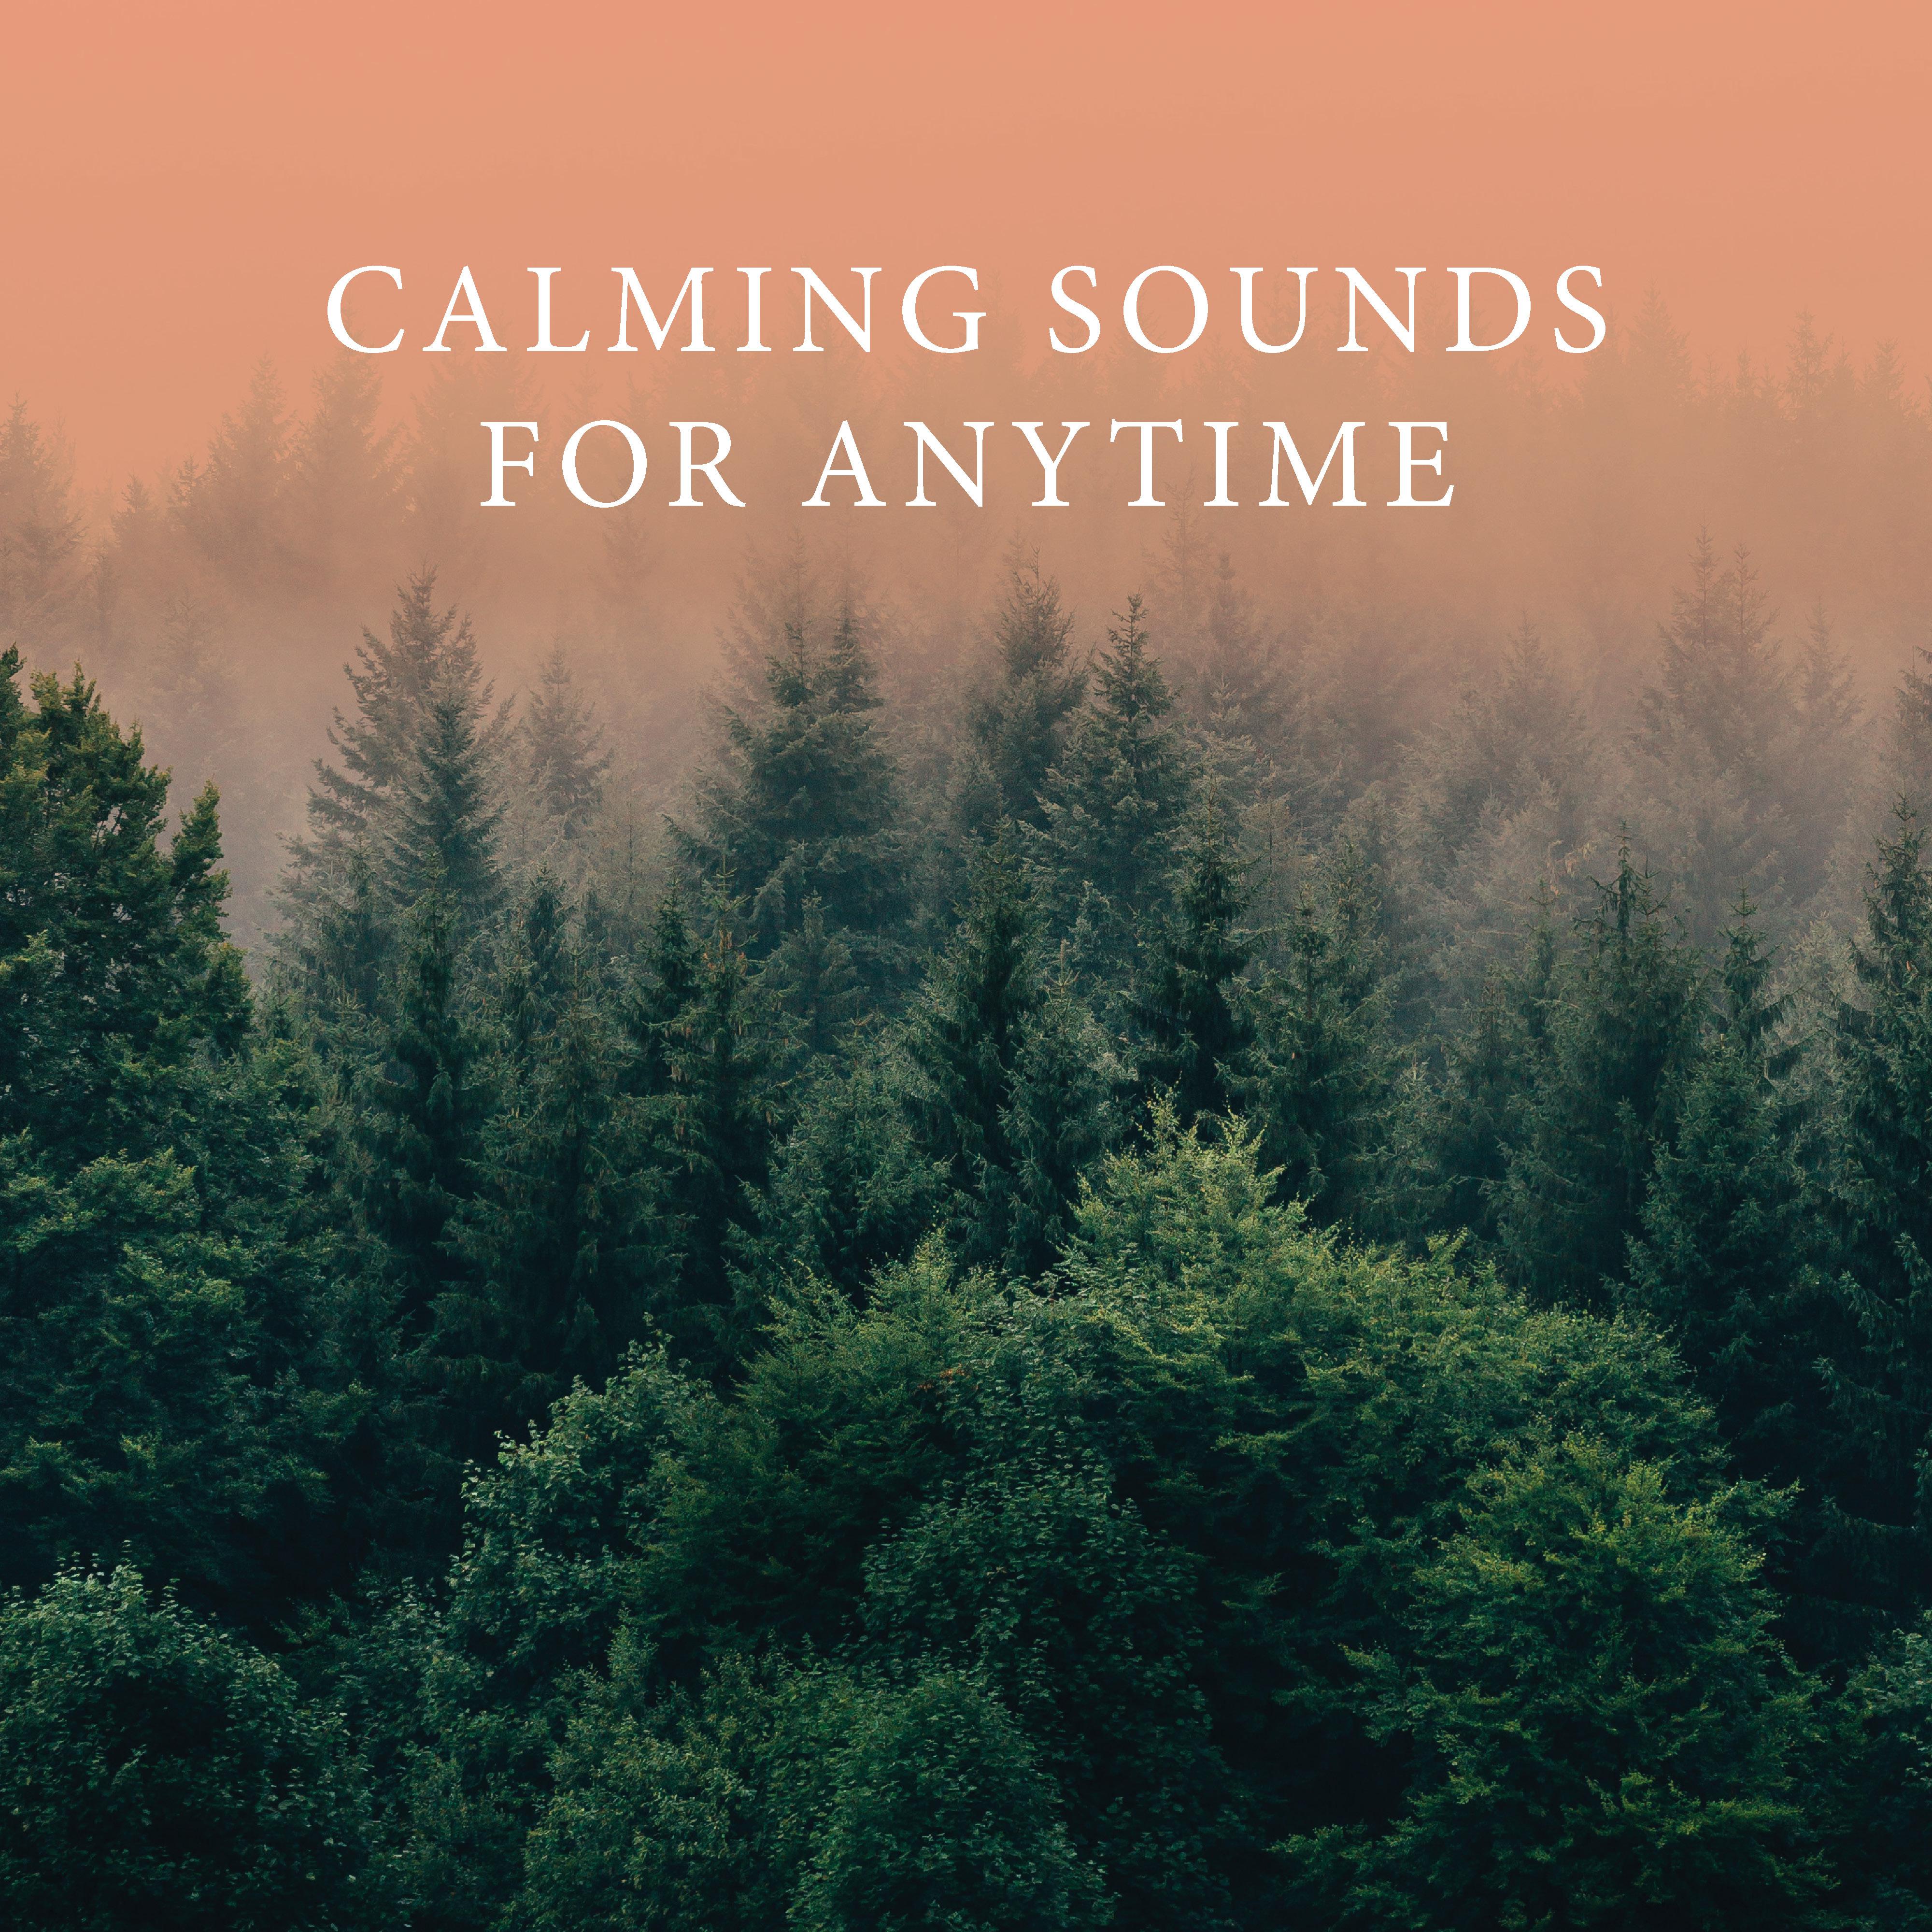 Calming sounds for anytime